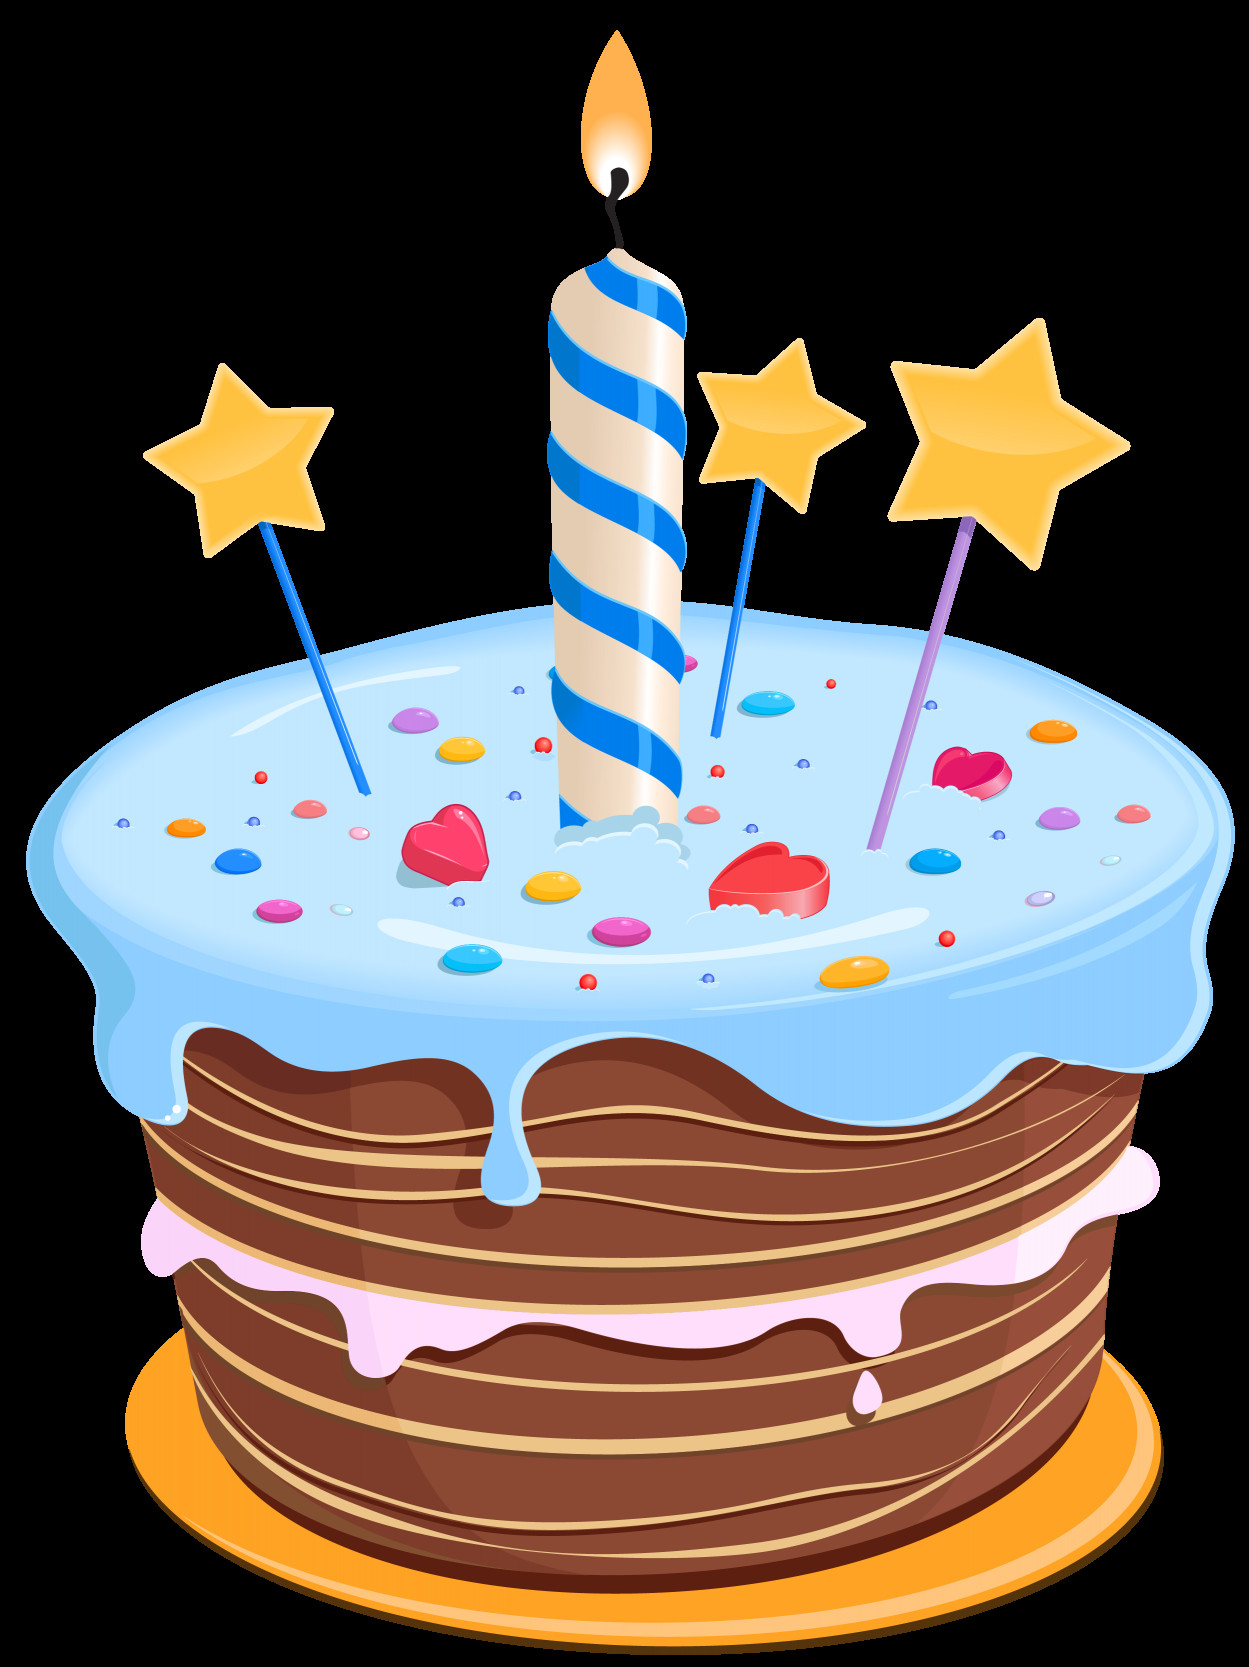 Birthday Cake Clip Art
 Set these cute birthday cake clipart as desktop profile in